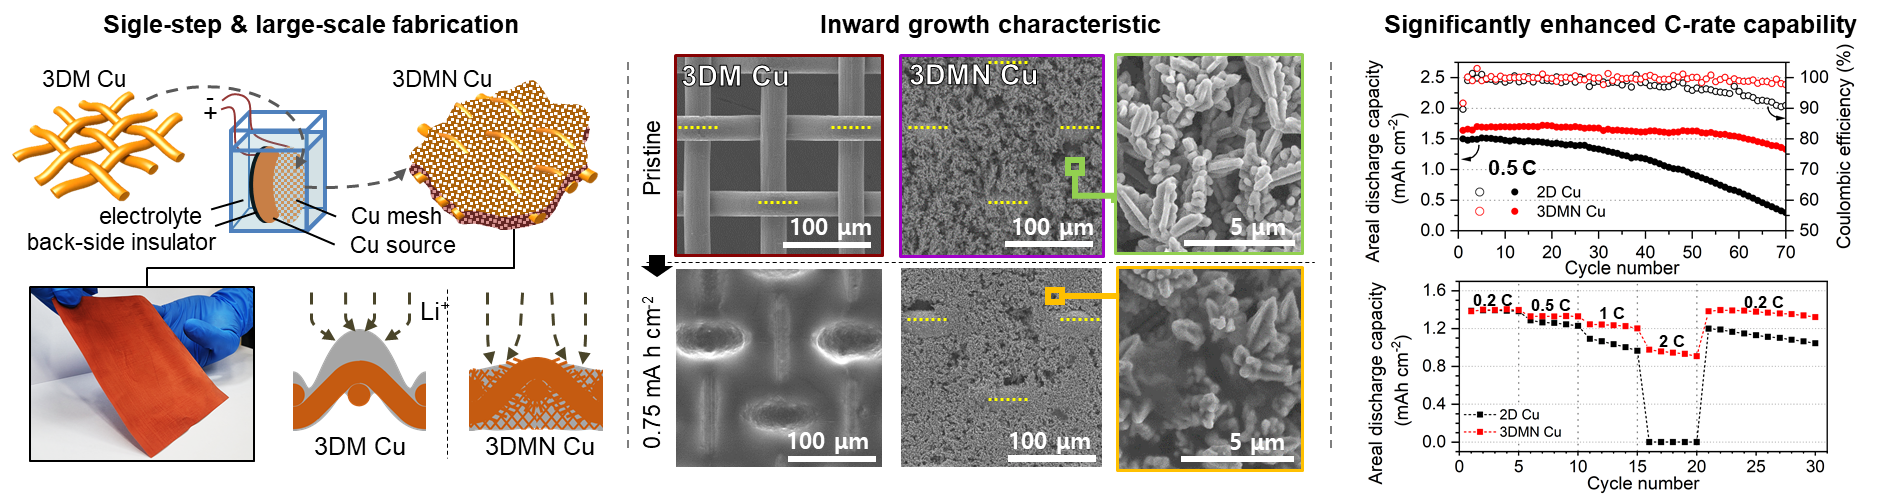 Figure 3. Facile, large-scale fabrication of hierarchically structured current collectors with selective inward growth characteristics and its performance as a lithium metal battery anode. [Copyright: Advanced Energy Materials 2023, 13, 2202321.]